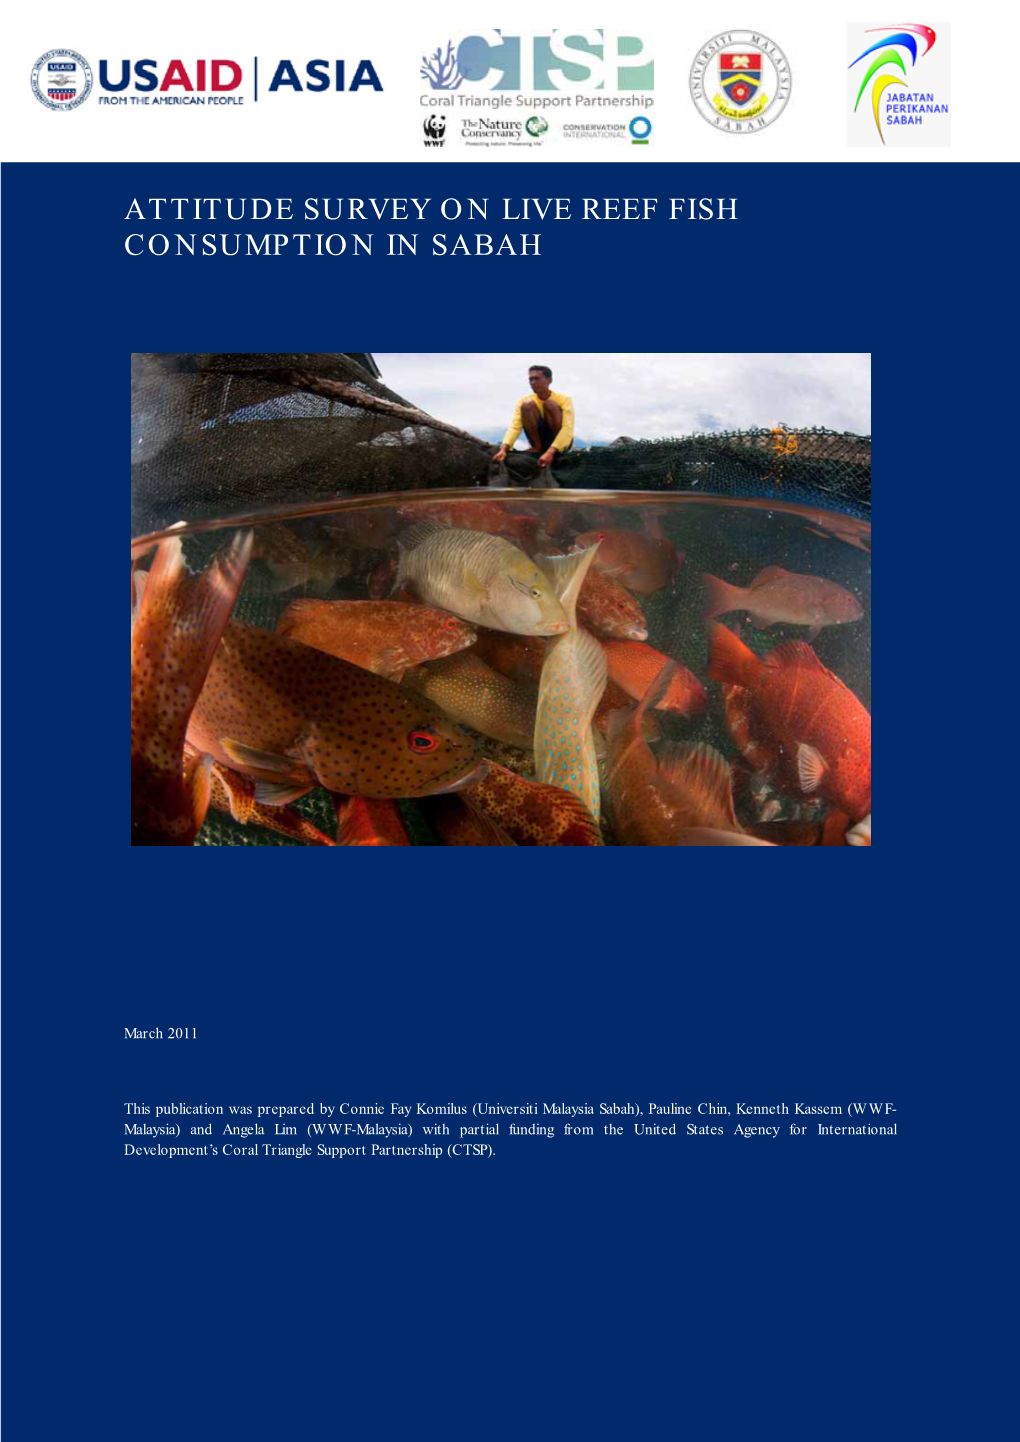 Attitude Survey on Live Reef Fish Consumption in Sabah